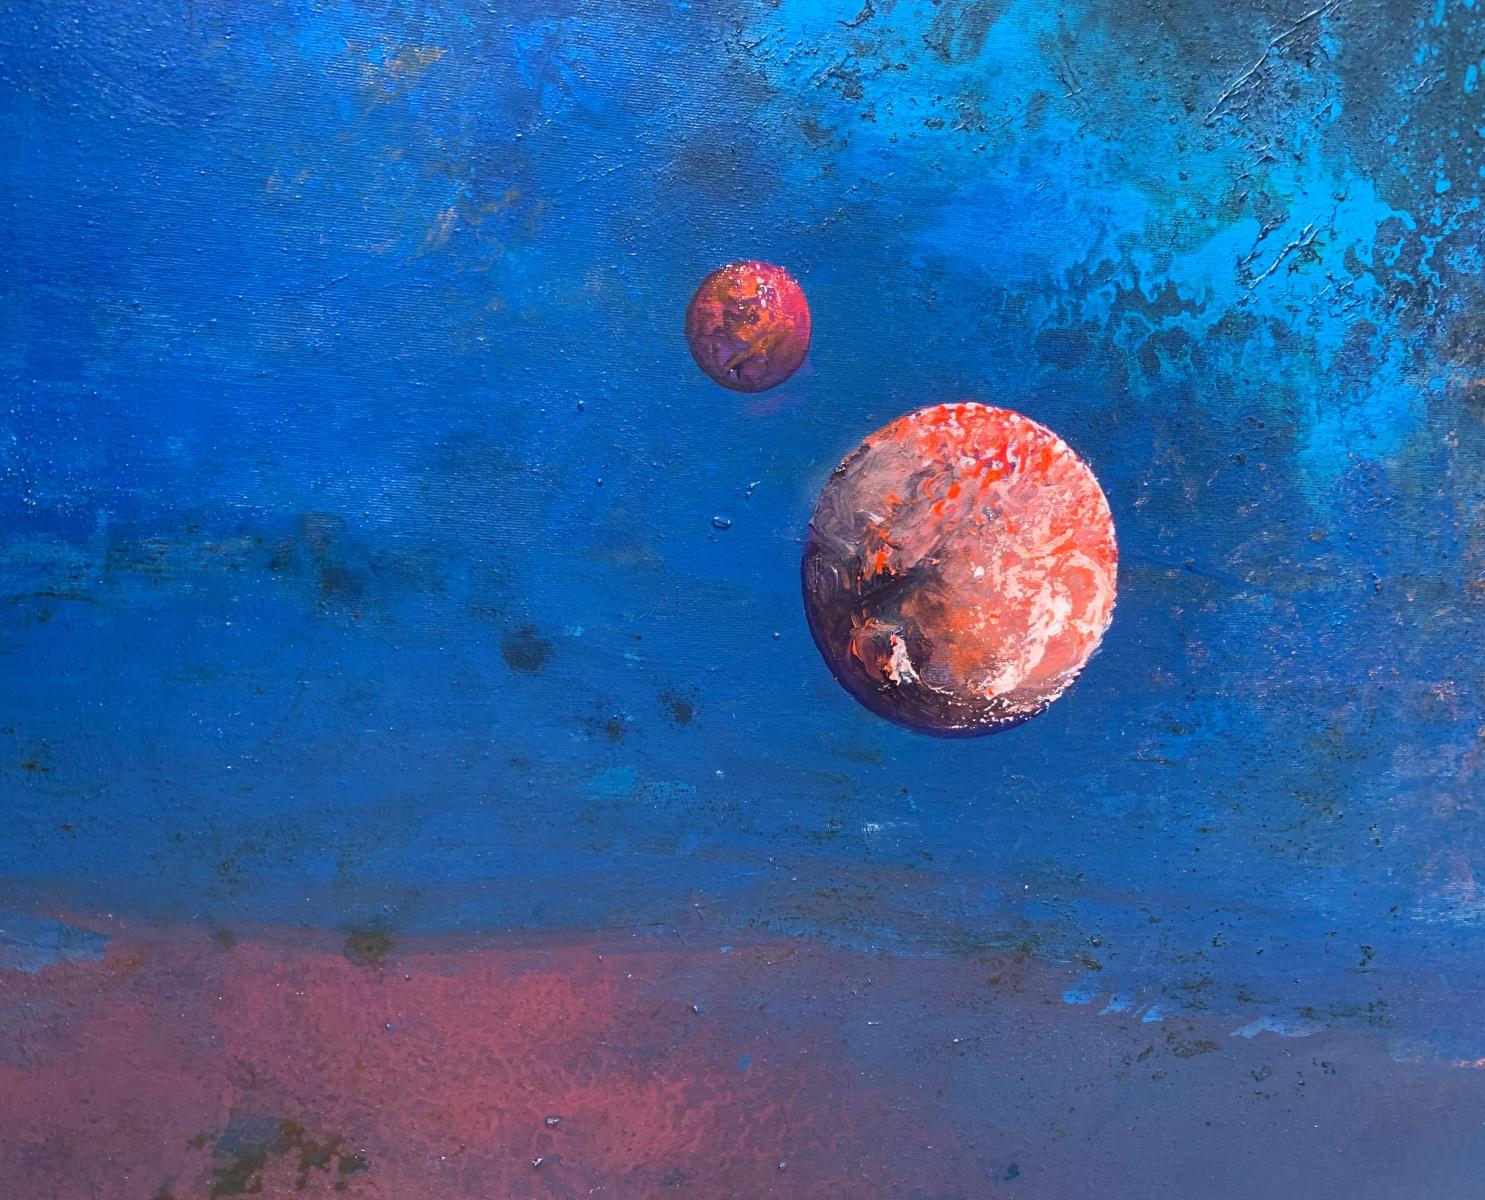 Contemporary acrylic on canvas figurative painting by Polish artist Barbara Hubert. Painting is in dark colors, it's mostly blue/navy blue. There is a little bit of texture. The planets look like they are illuminating. 

BARBARA HUBERT (born in